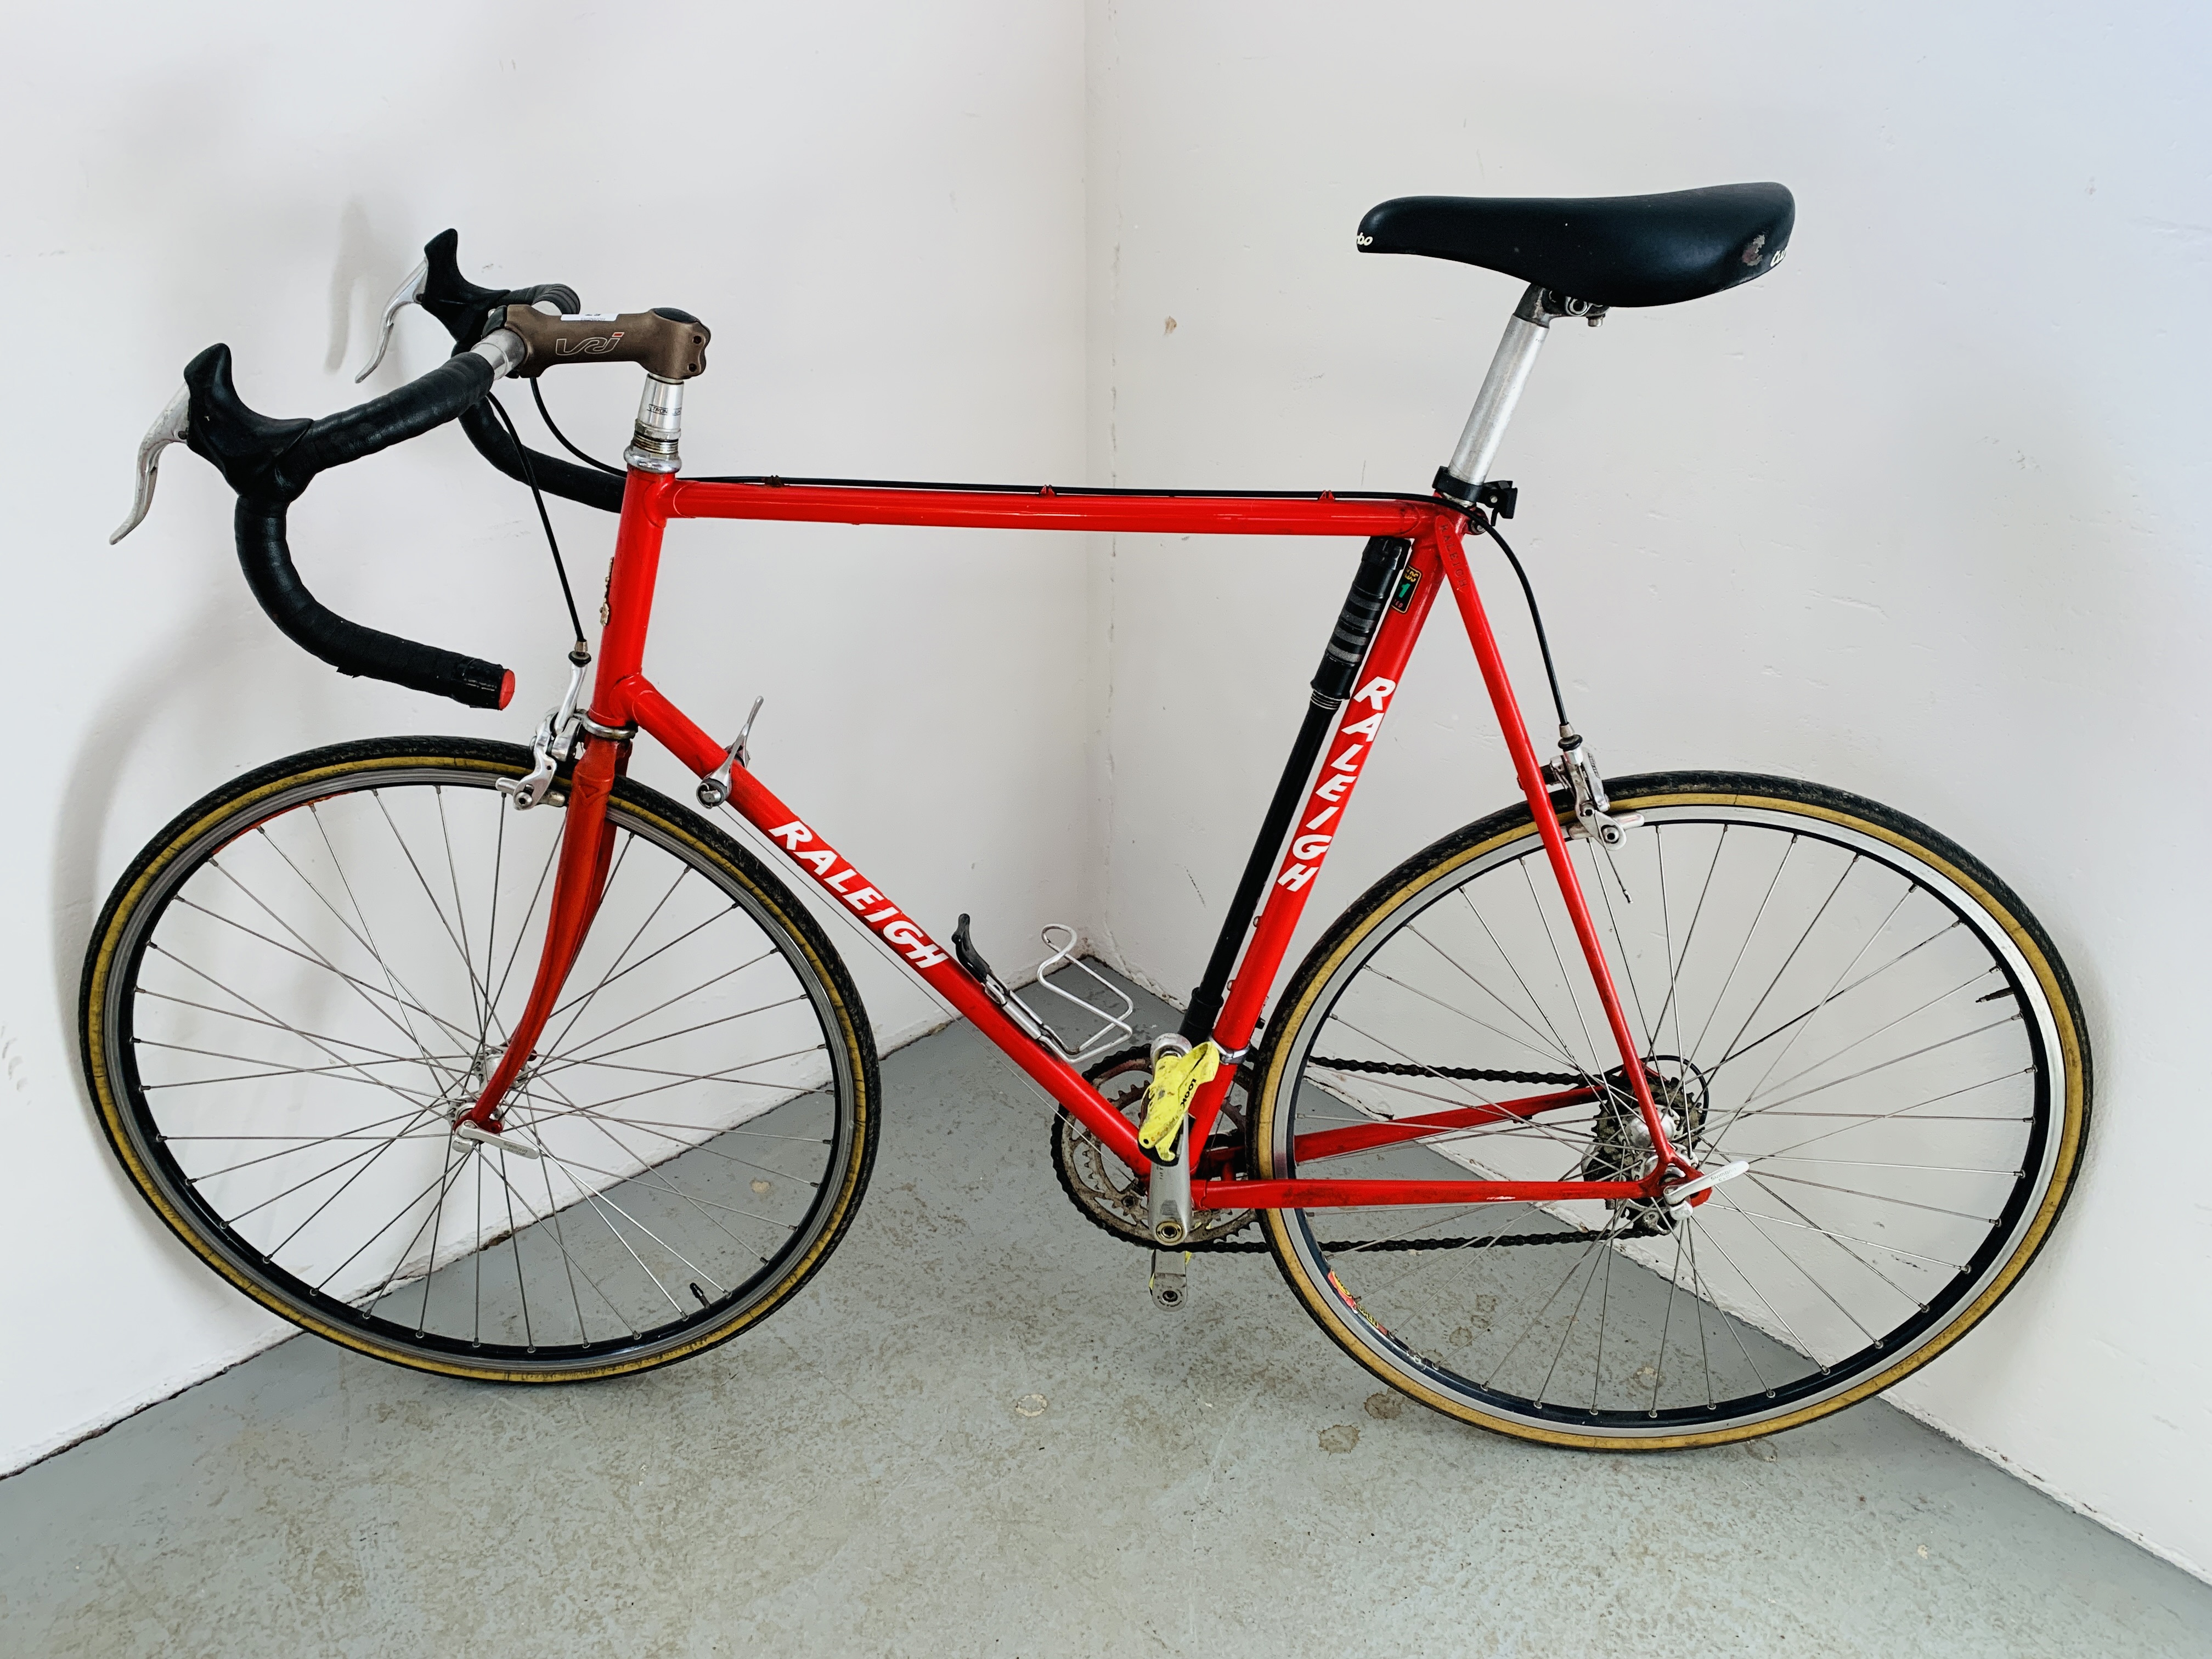 A GENTS RALEIGH 16 SPEED RACING BICYCLE REYNOLDS 531 26 INCH FRAME.